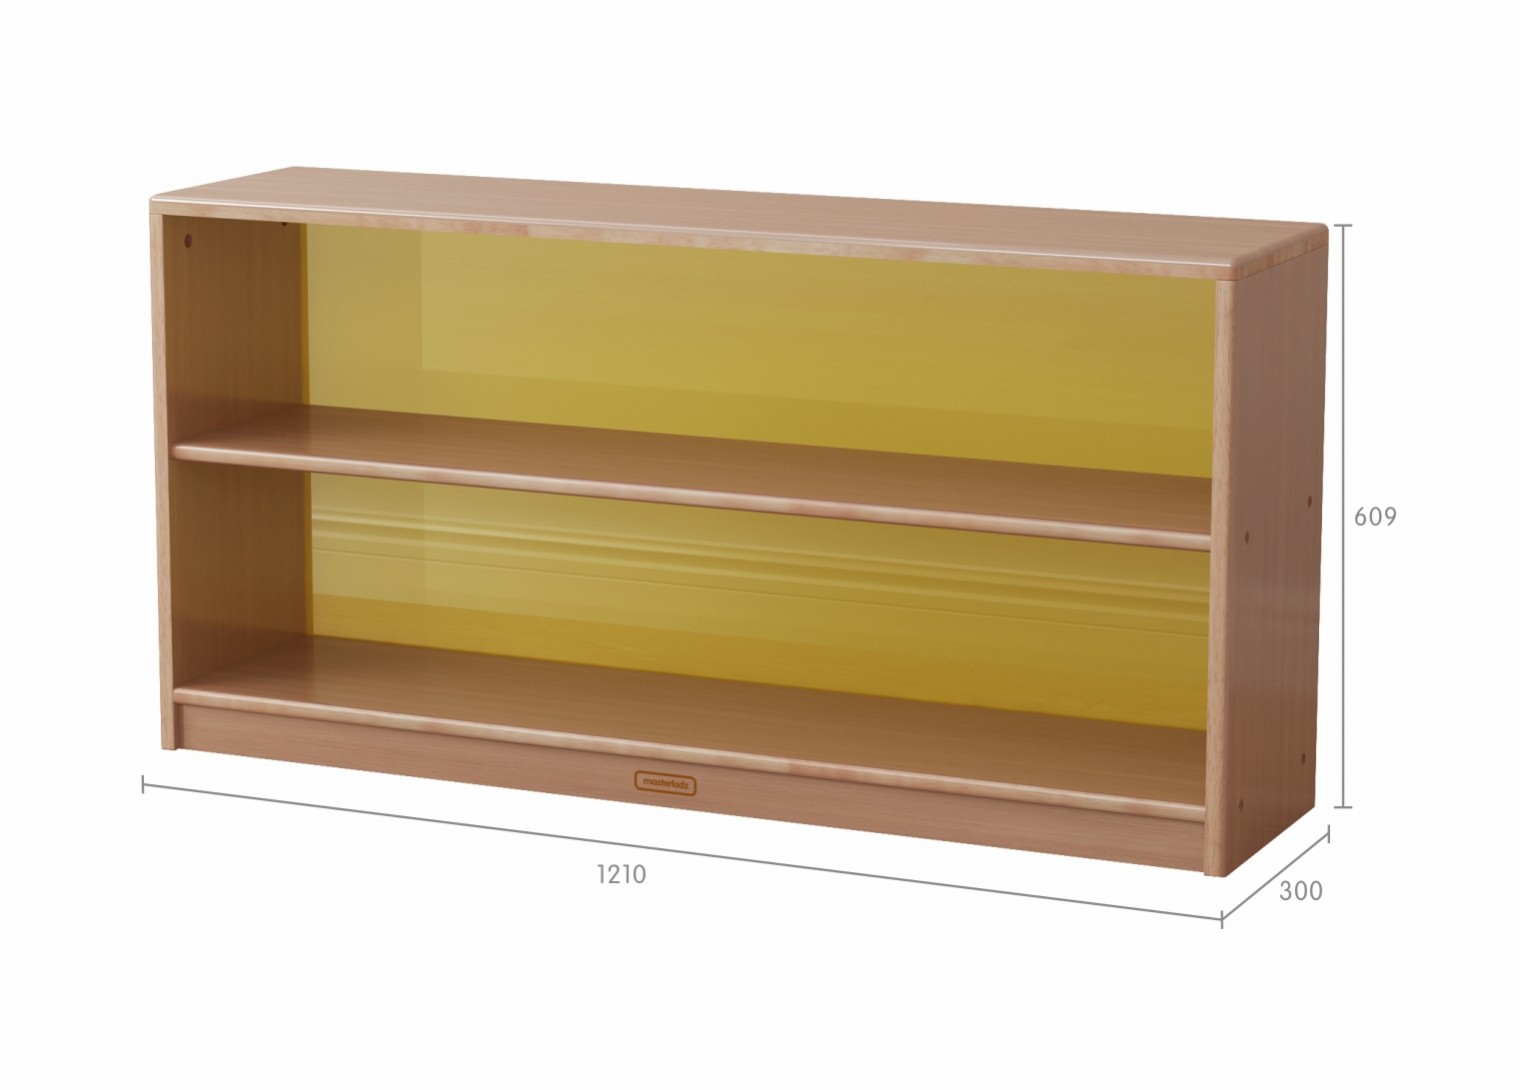 Forest School - 609H x 1210L Wooden  Shelving Unit - Translucent Yellow Back